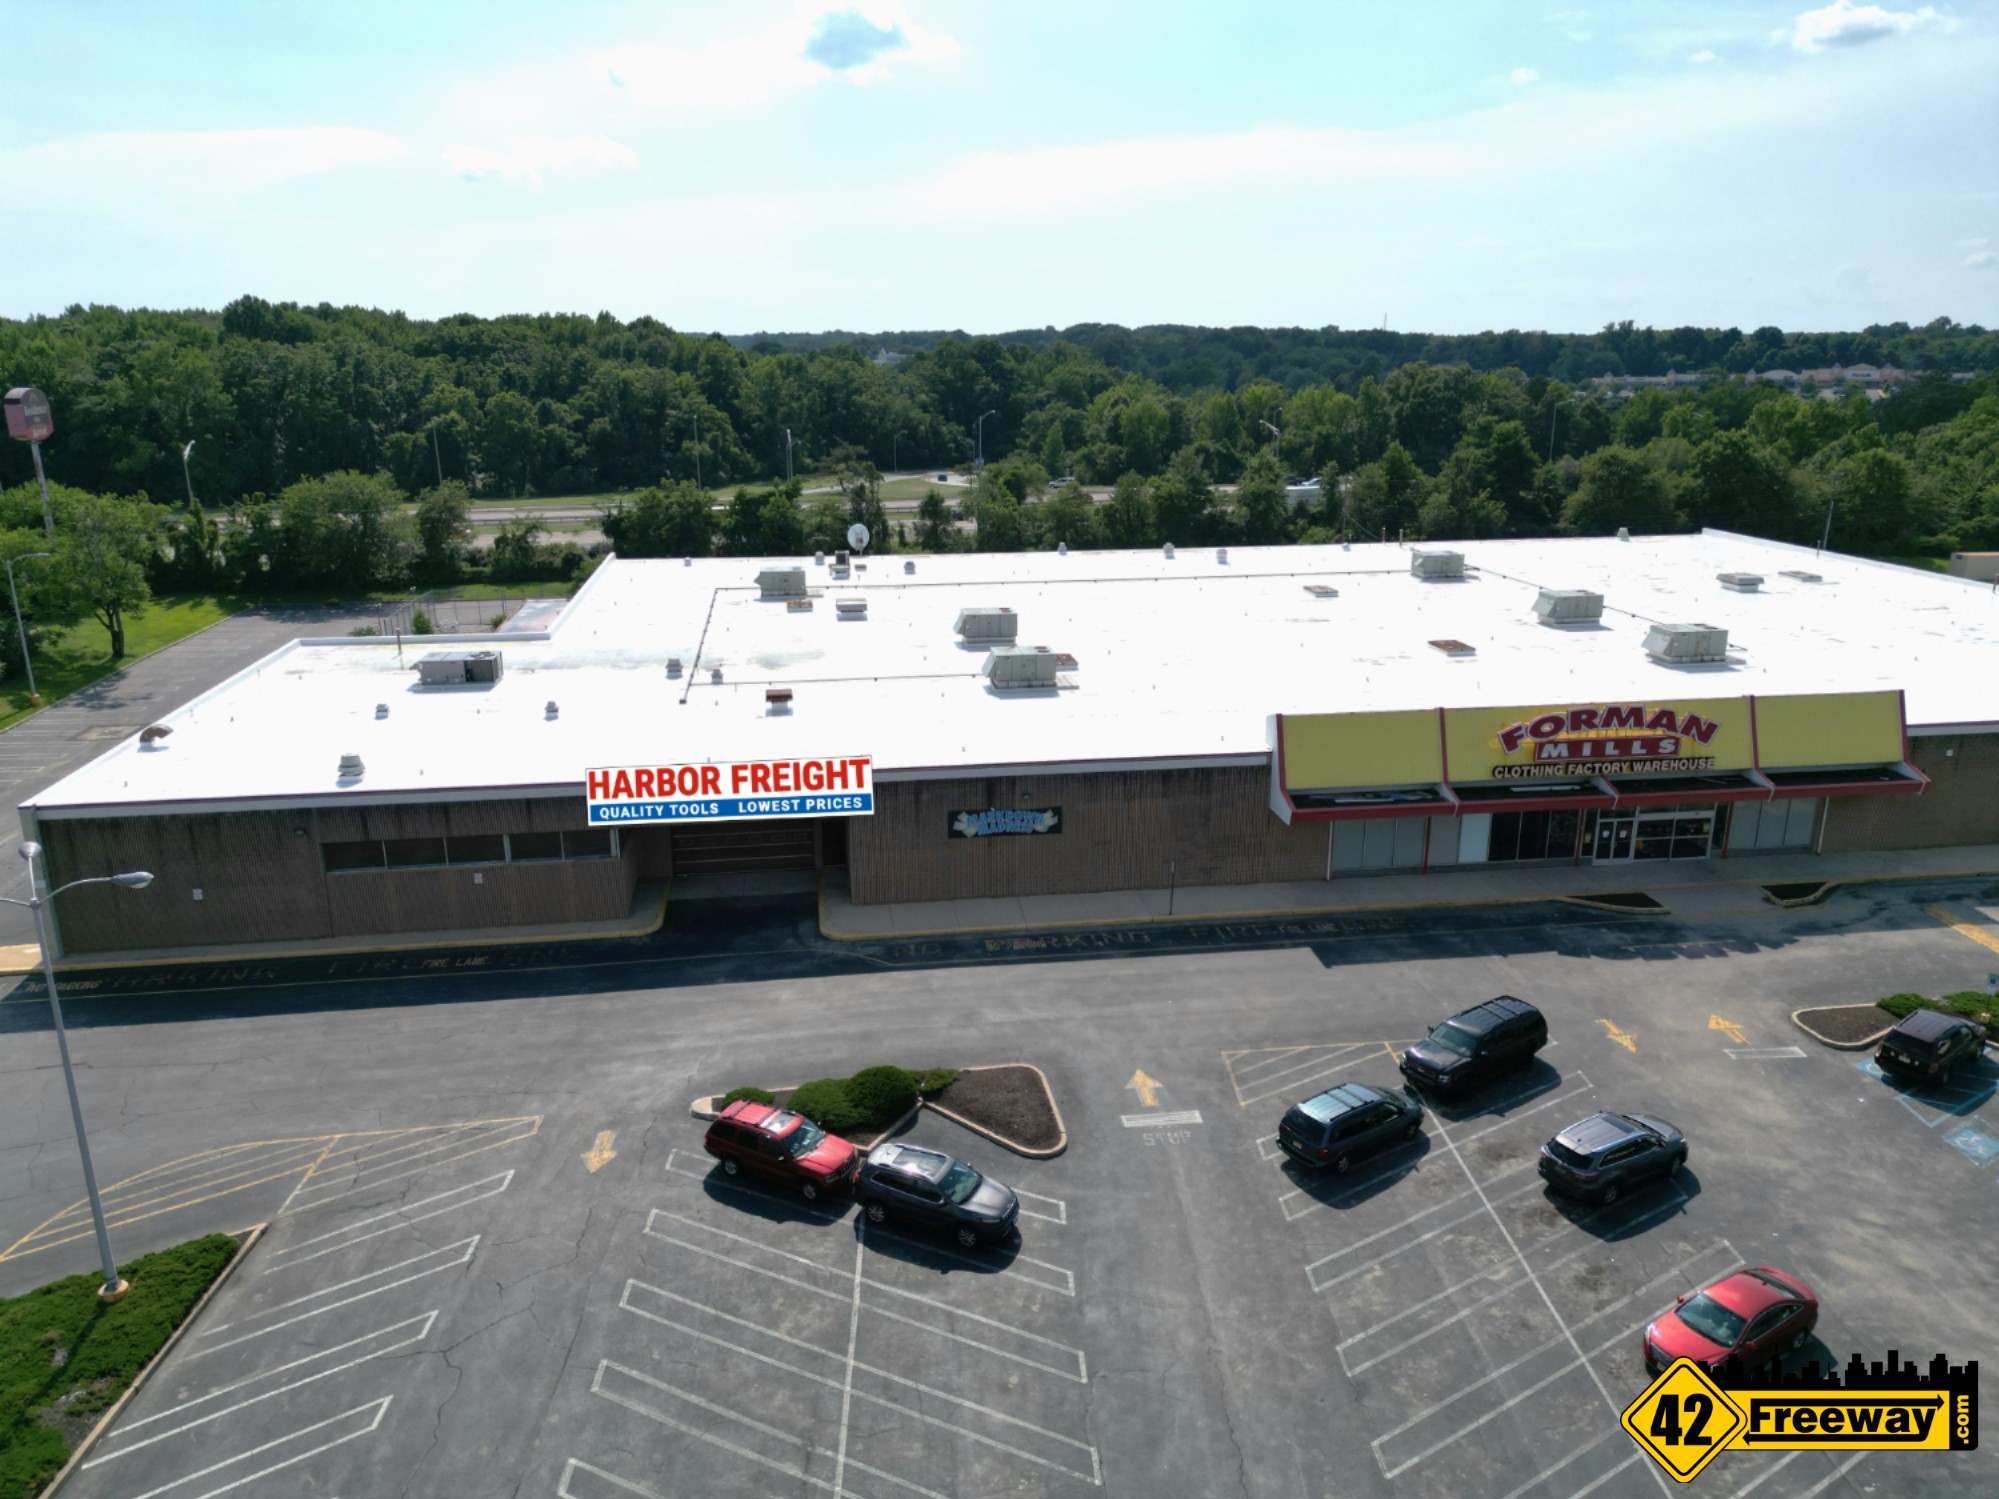 Harbor Freight Coming to Deptford. Taking a Portion of Forman